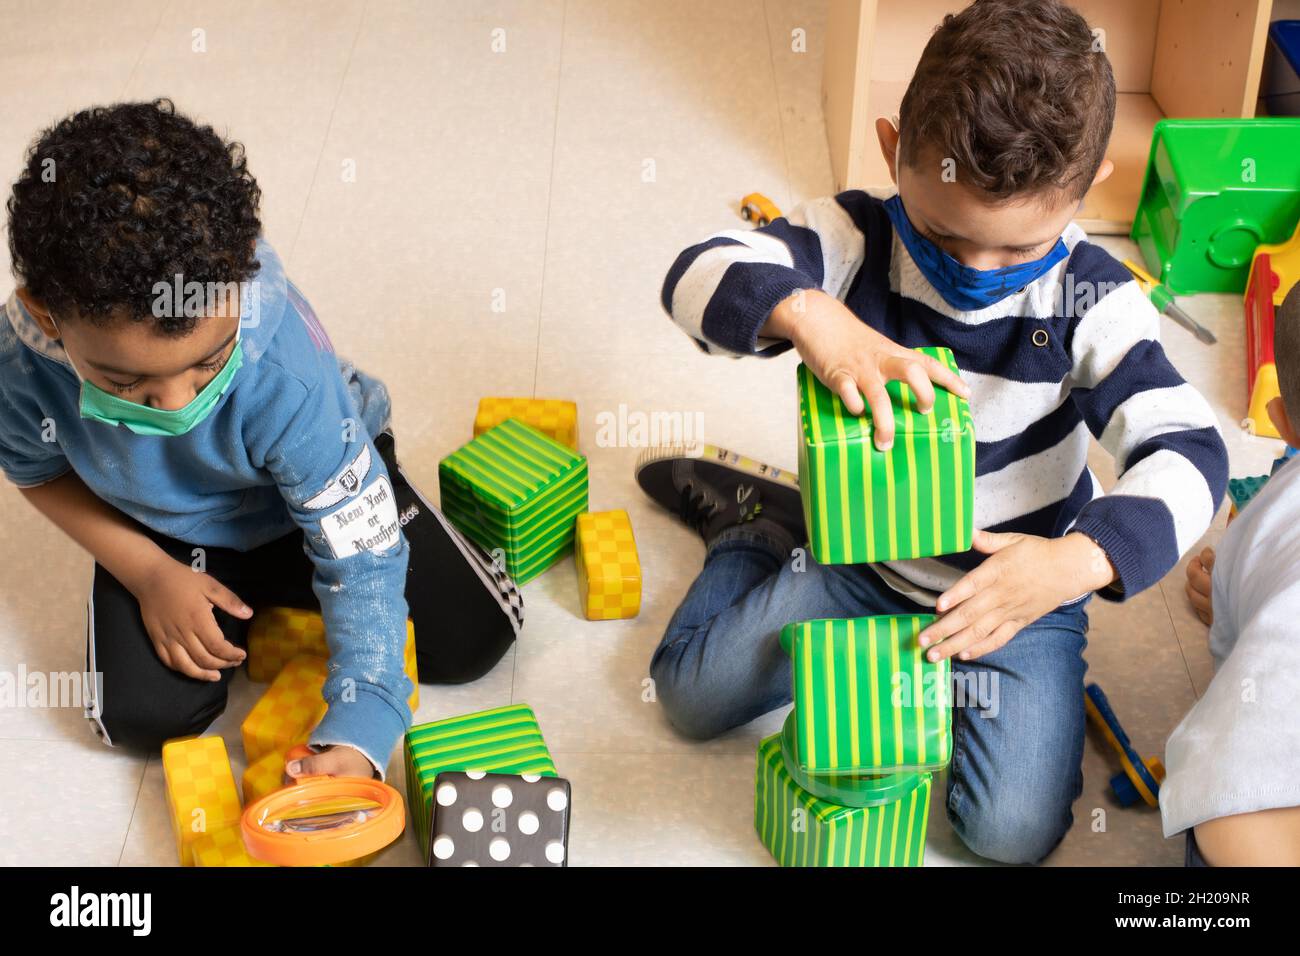 Education Preschool 3-4 year olds two boys playing separately in classroom, one building with blocks the other using a magniifying glass both wearing Stock Photo